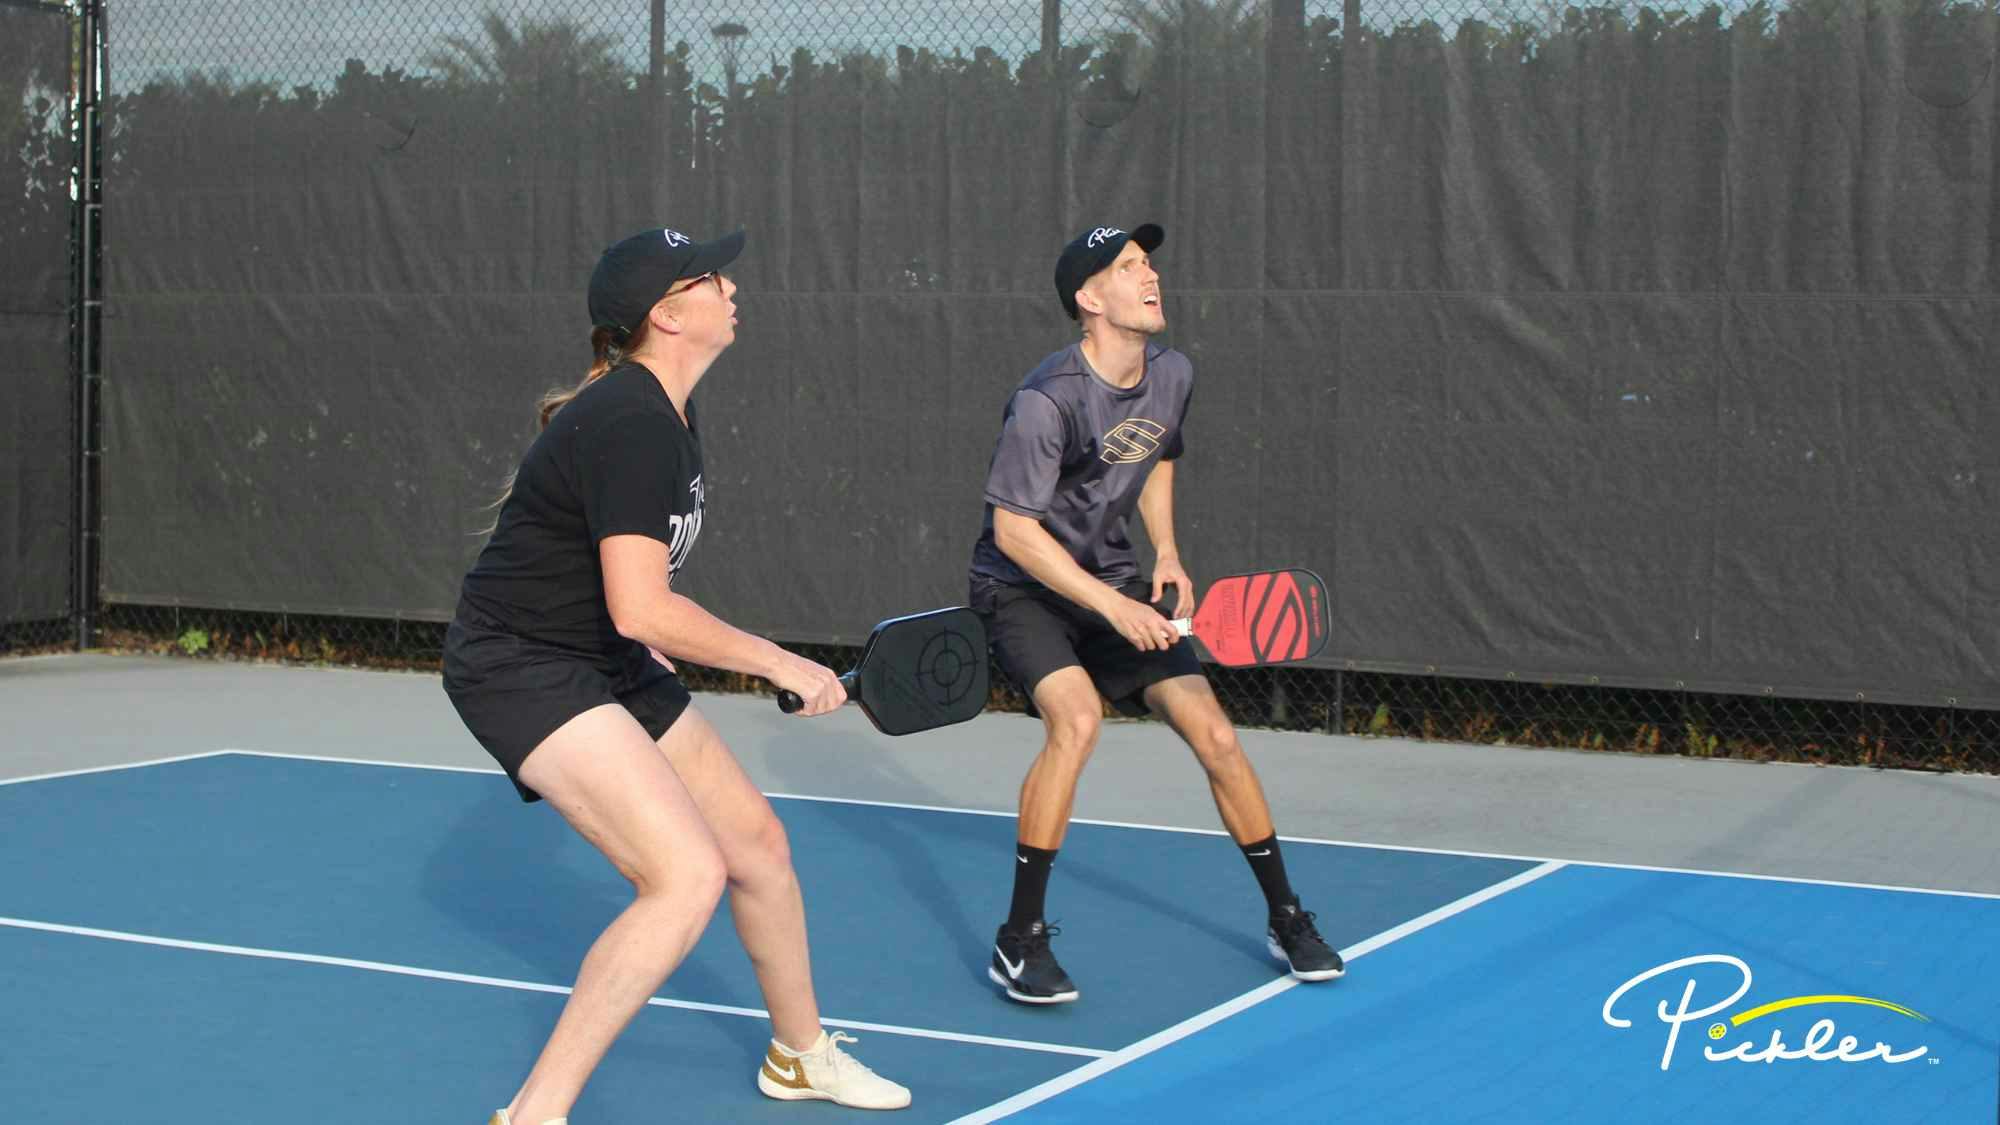 USA Pickleball Creates “Quiet Category” to Address Noise Concerns with the Sport